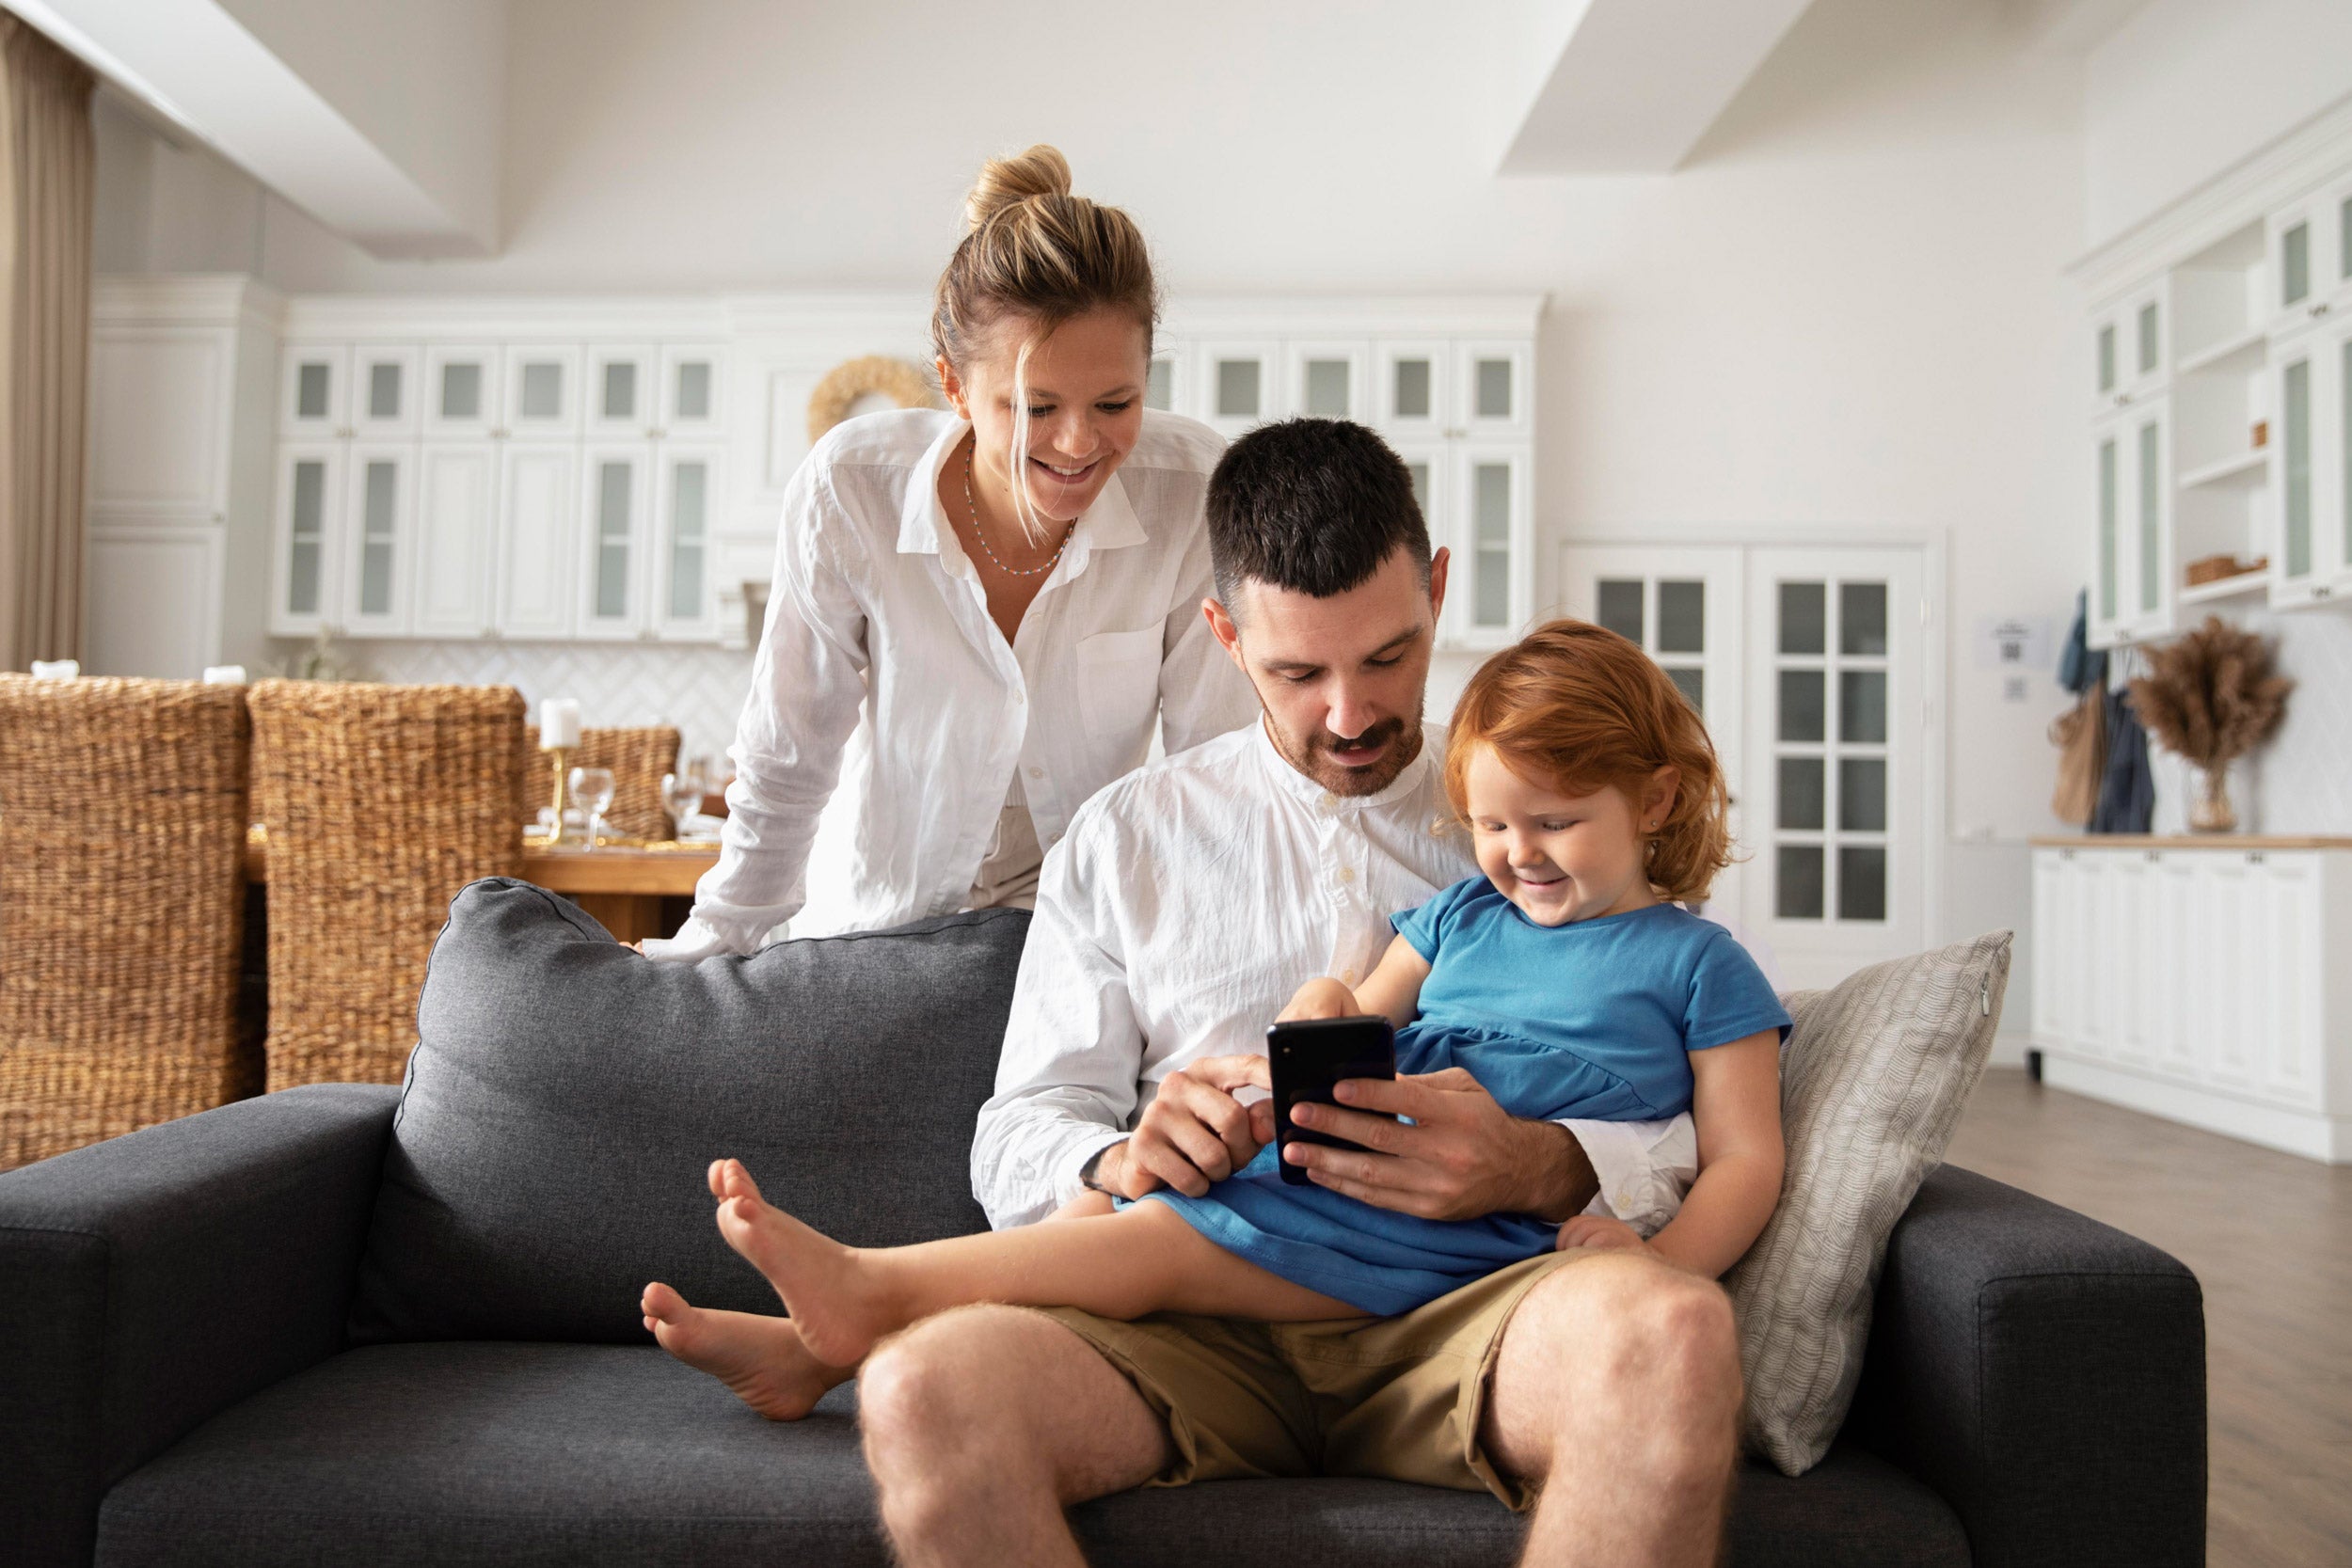 Family-dad-with-woman-and-kid-using-mobile-device-on-couch-to-arm-system